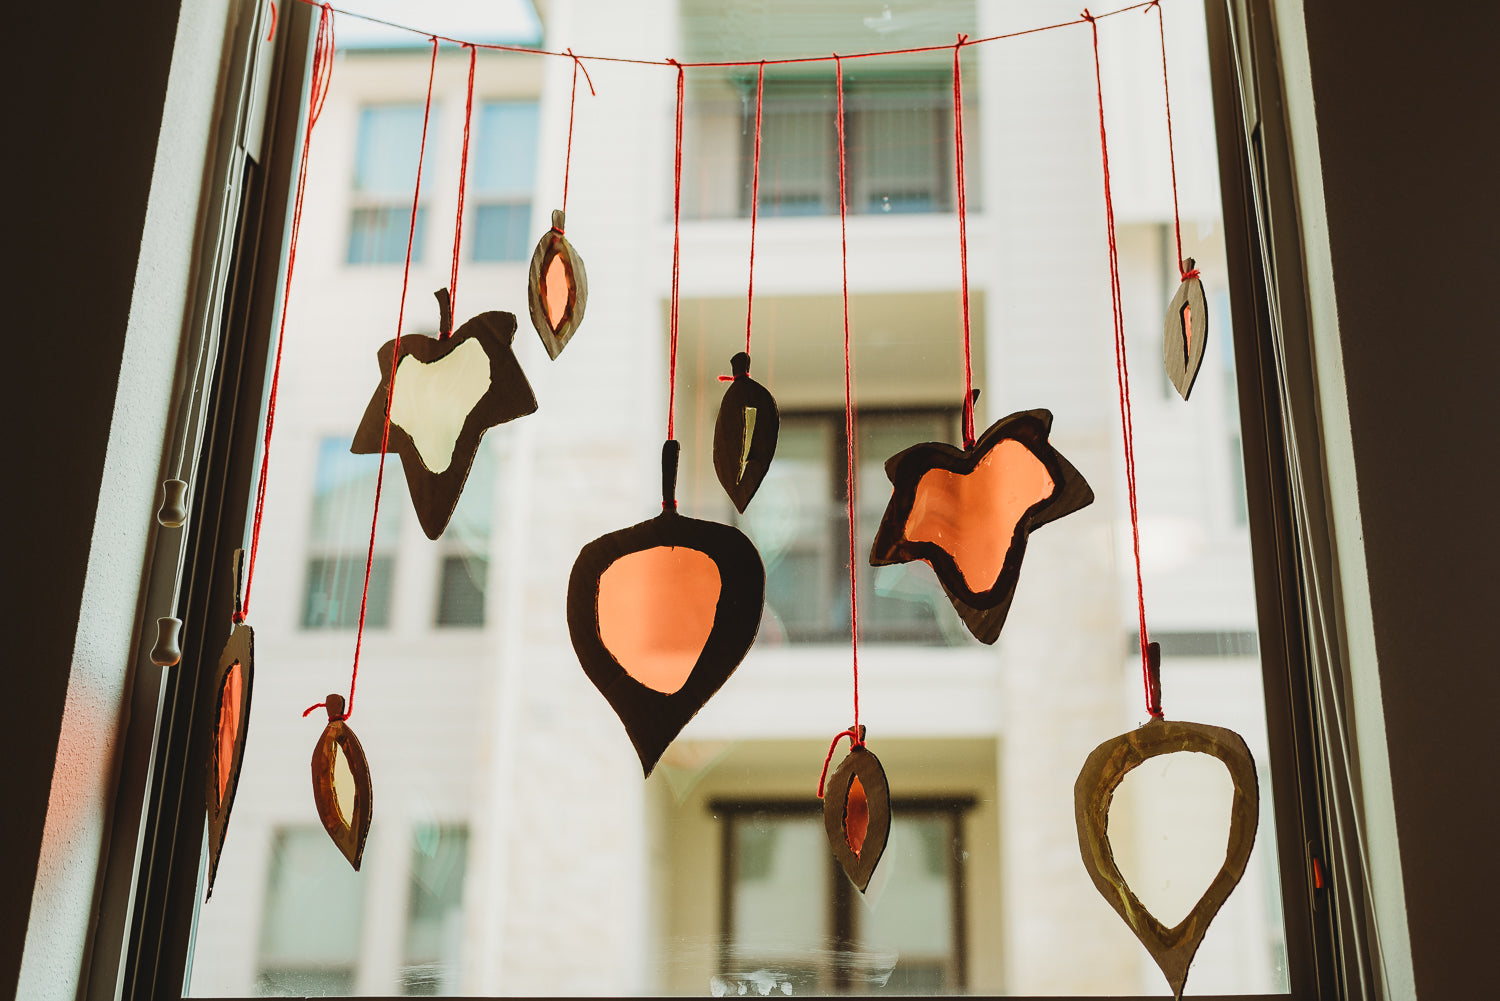 Series of cardboard leaves hanging from red yarn in a window.